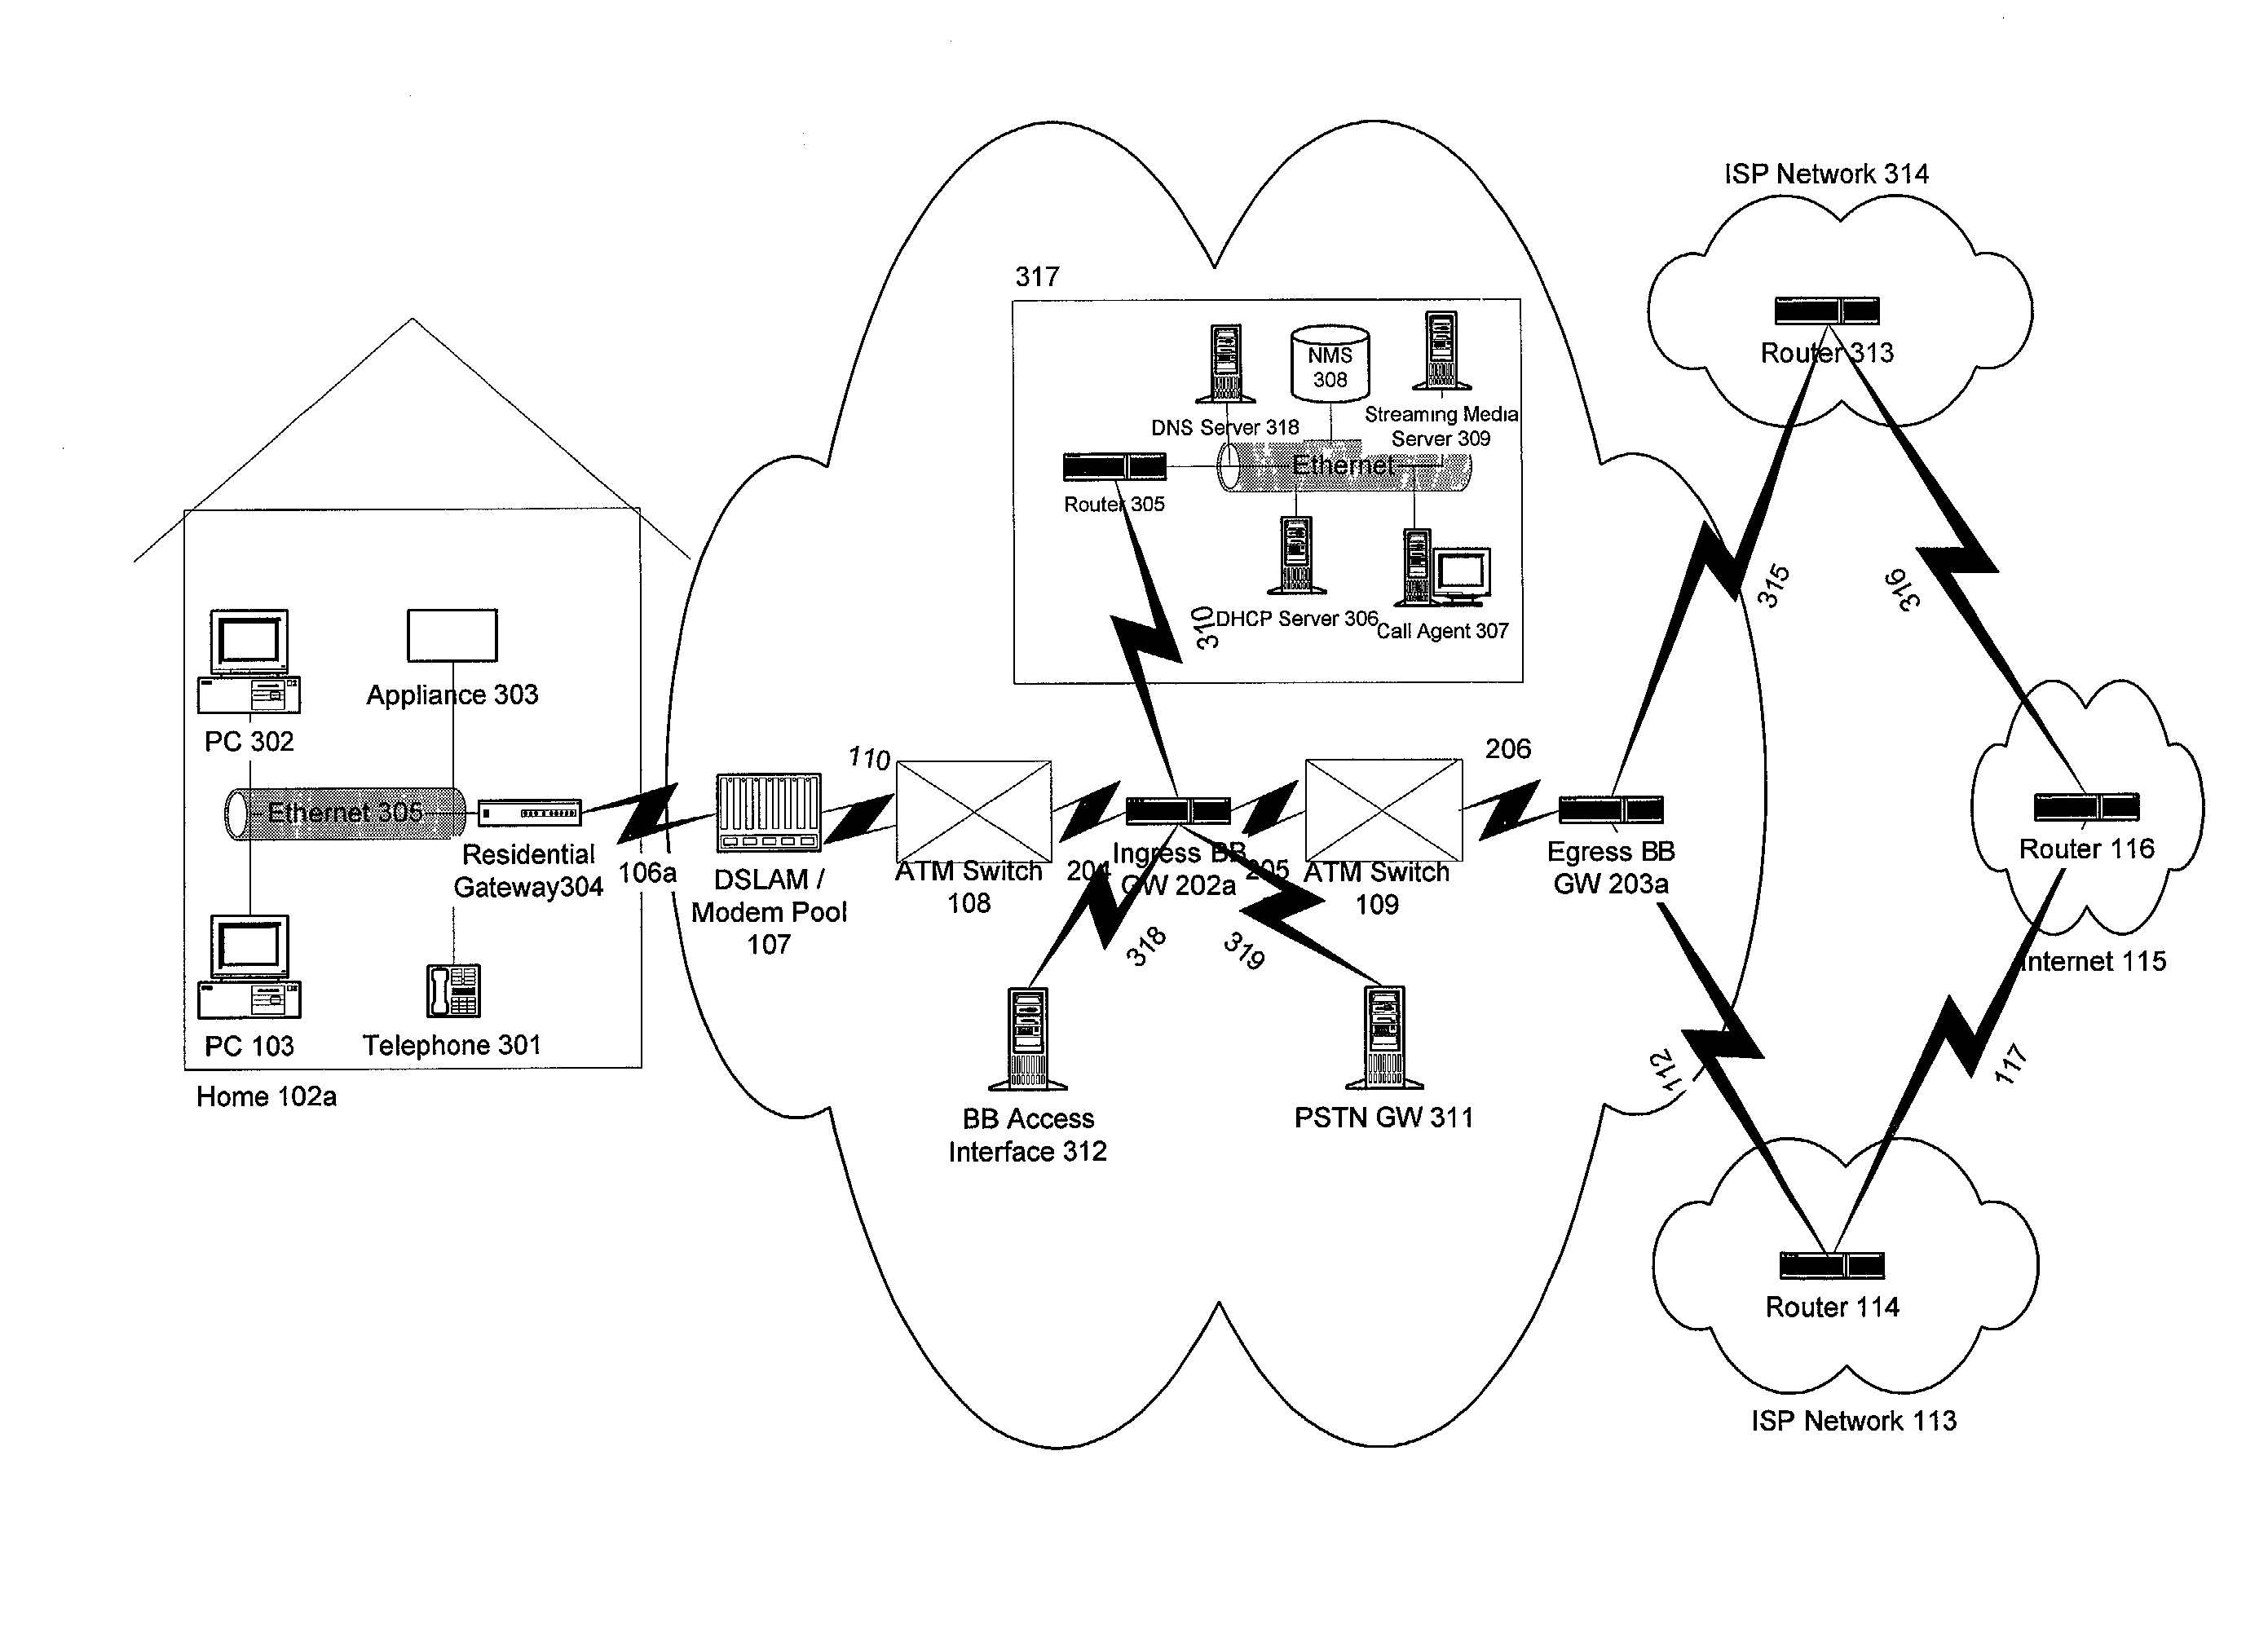 System and method for providing network and service access independent of an internet service provider